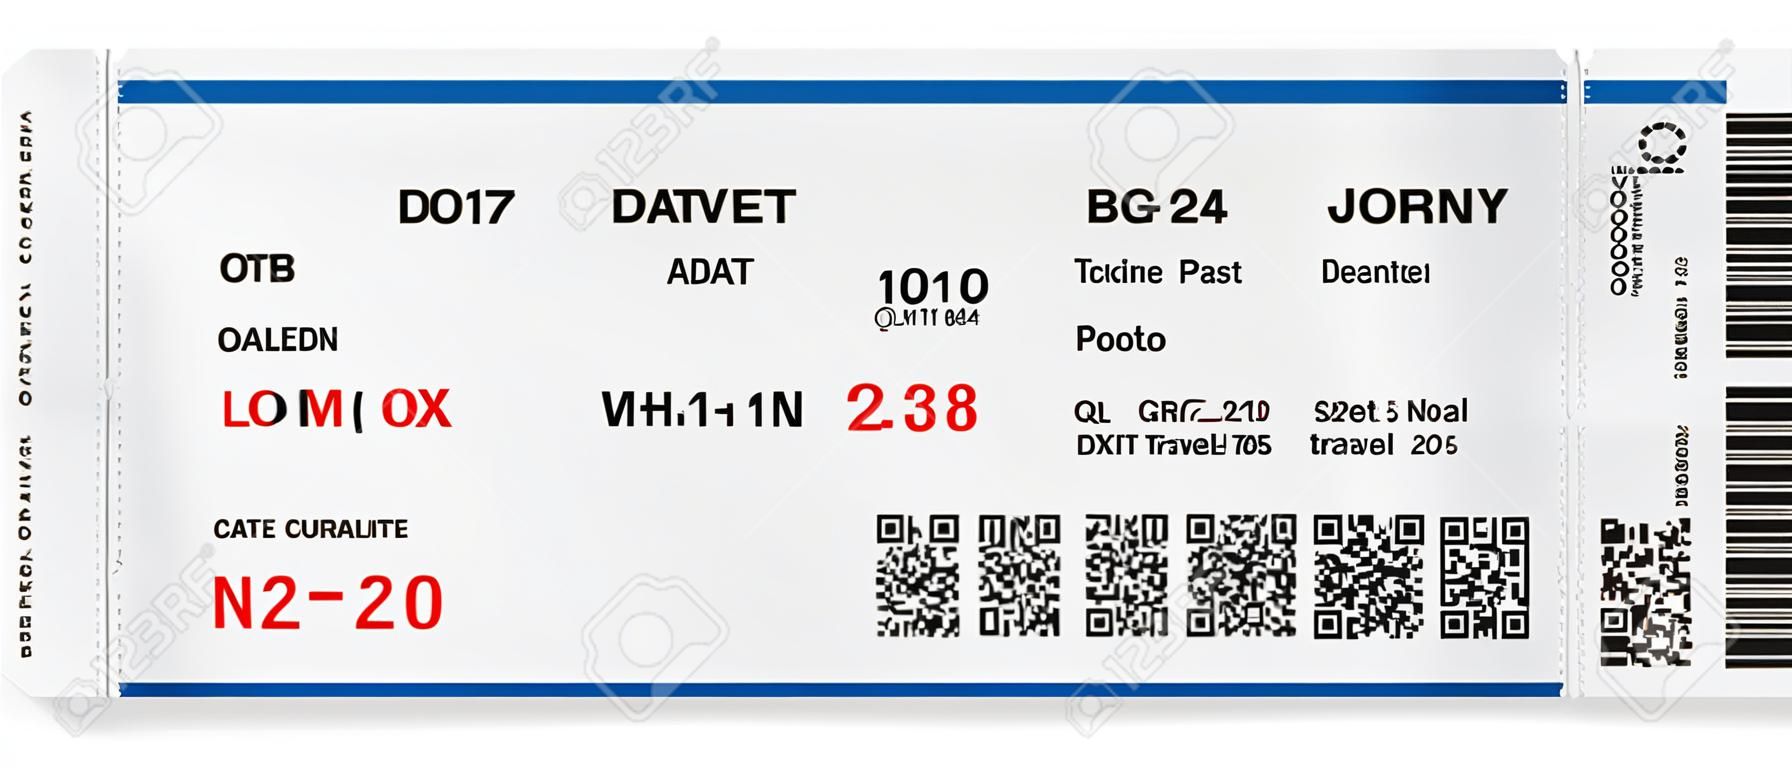 Pattern of airline boarding pass ticket with QR2 code. Concept of travel, journey or business. Isolated on white. Vector illustration